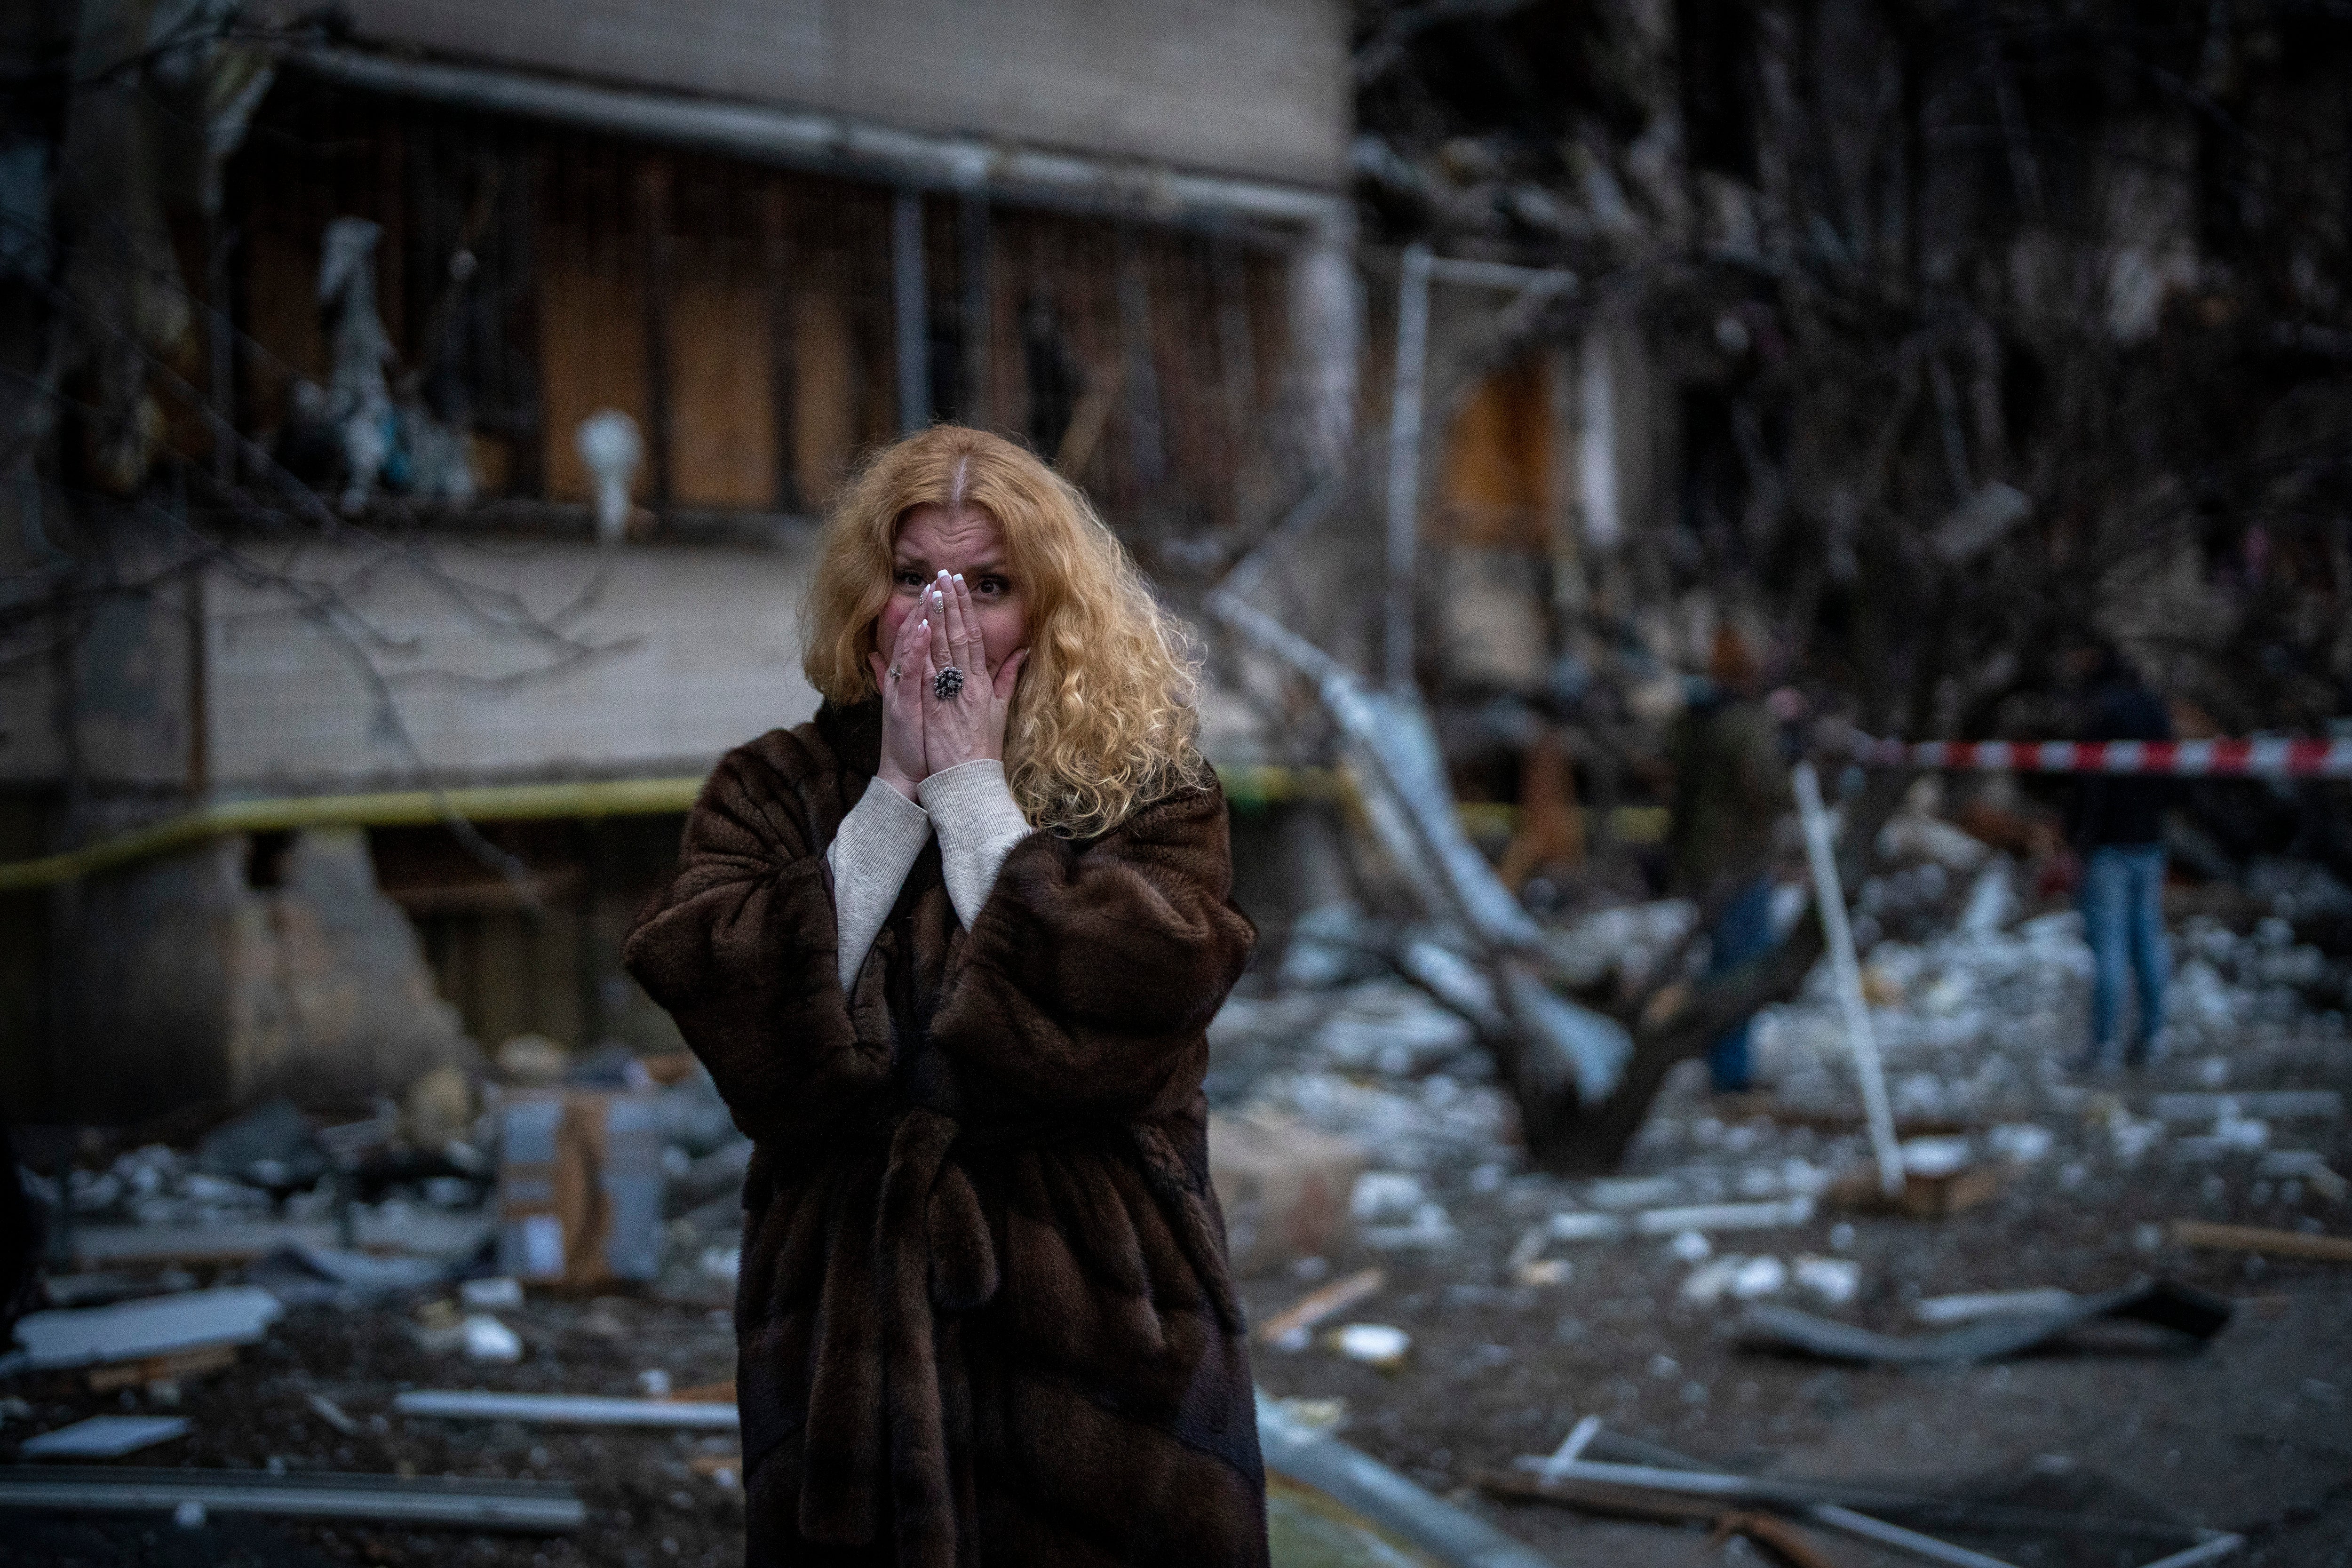 Natali Sevriukova reacts as she stands next to her house following a rocket attack in the city of Kyiv, Ukraine, Friday 25 February 2022